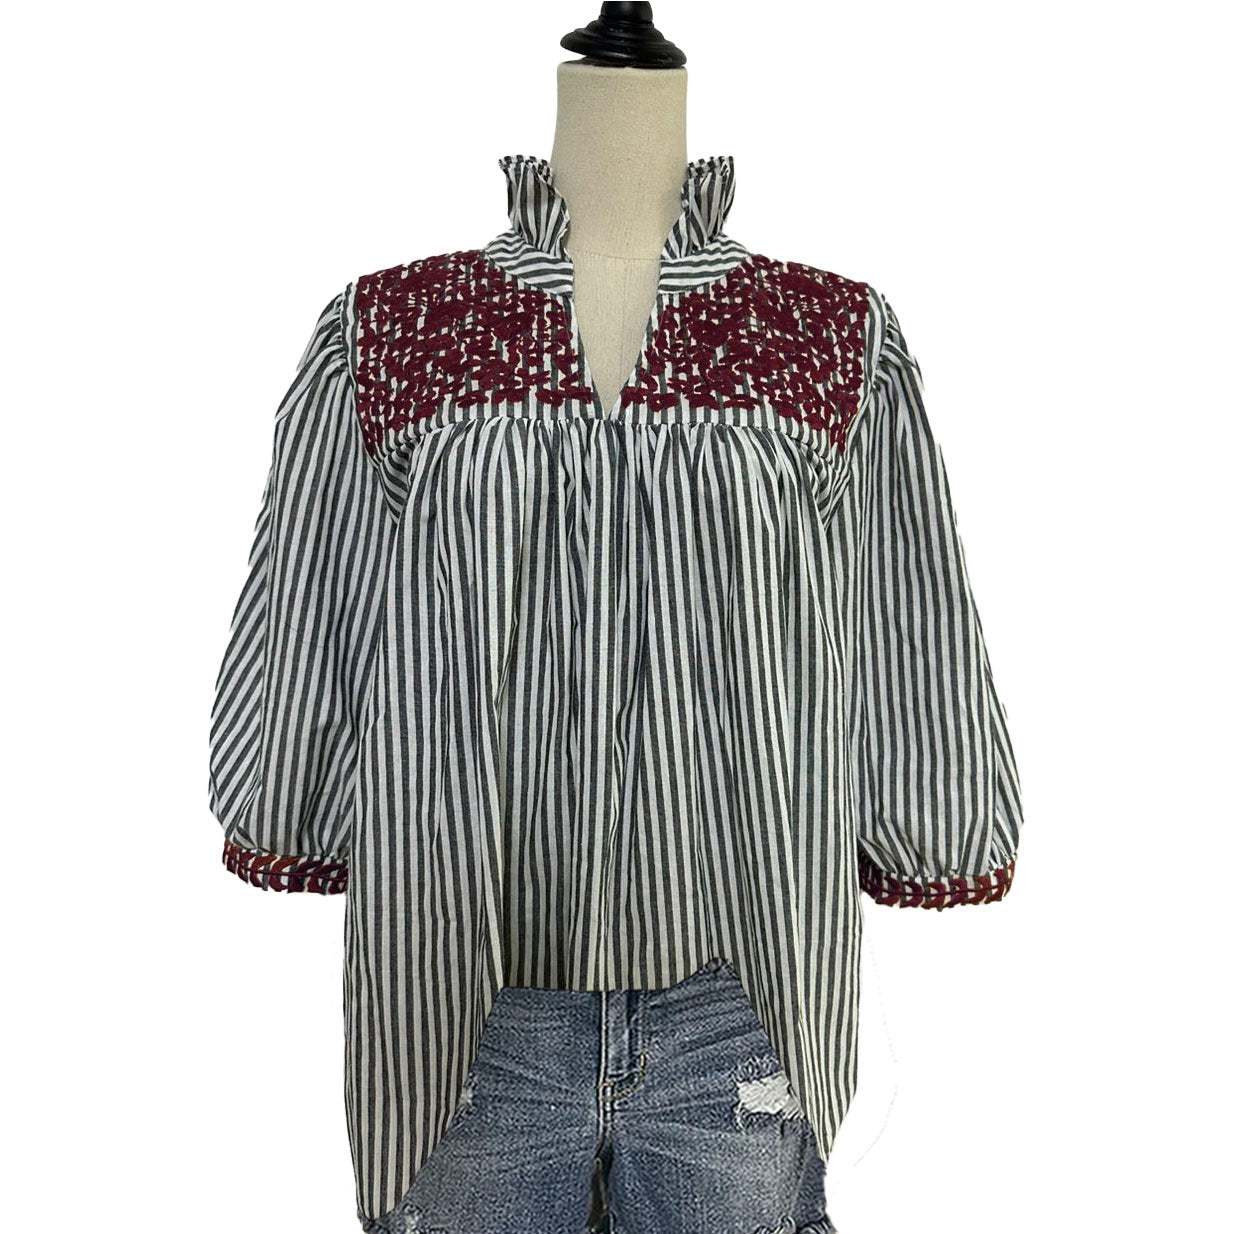 Aggie Ticking Tailgater Blouse (XS, M only)